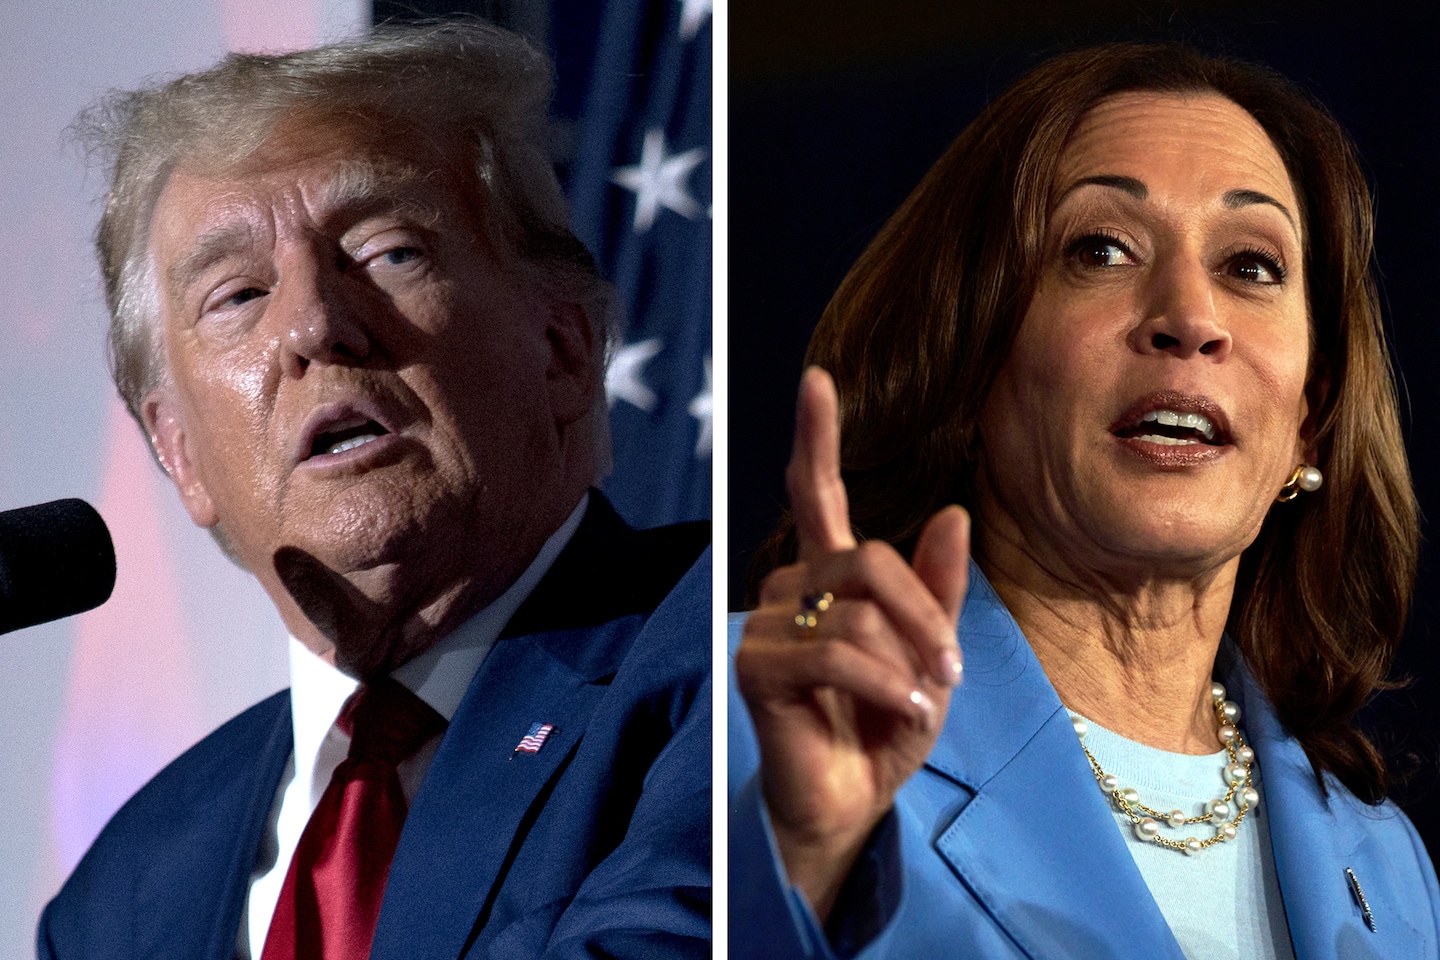 Harris, Trump hold dueling events as new presidential race takes shape